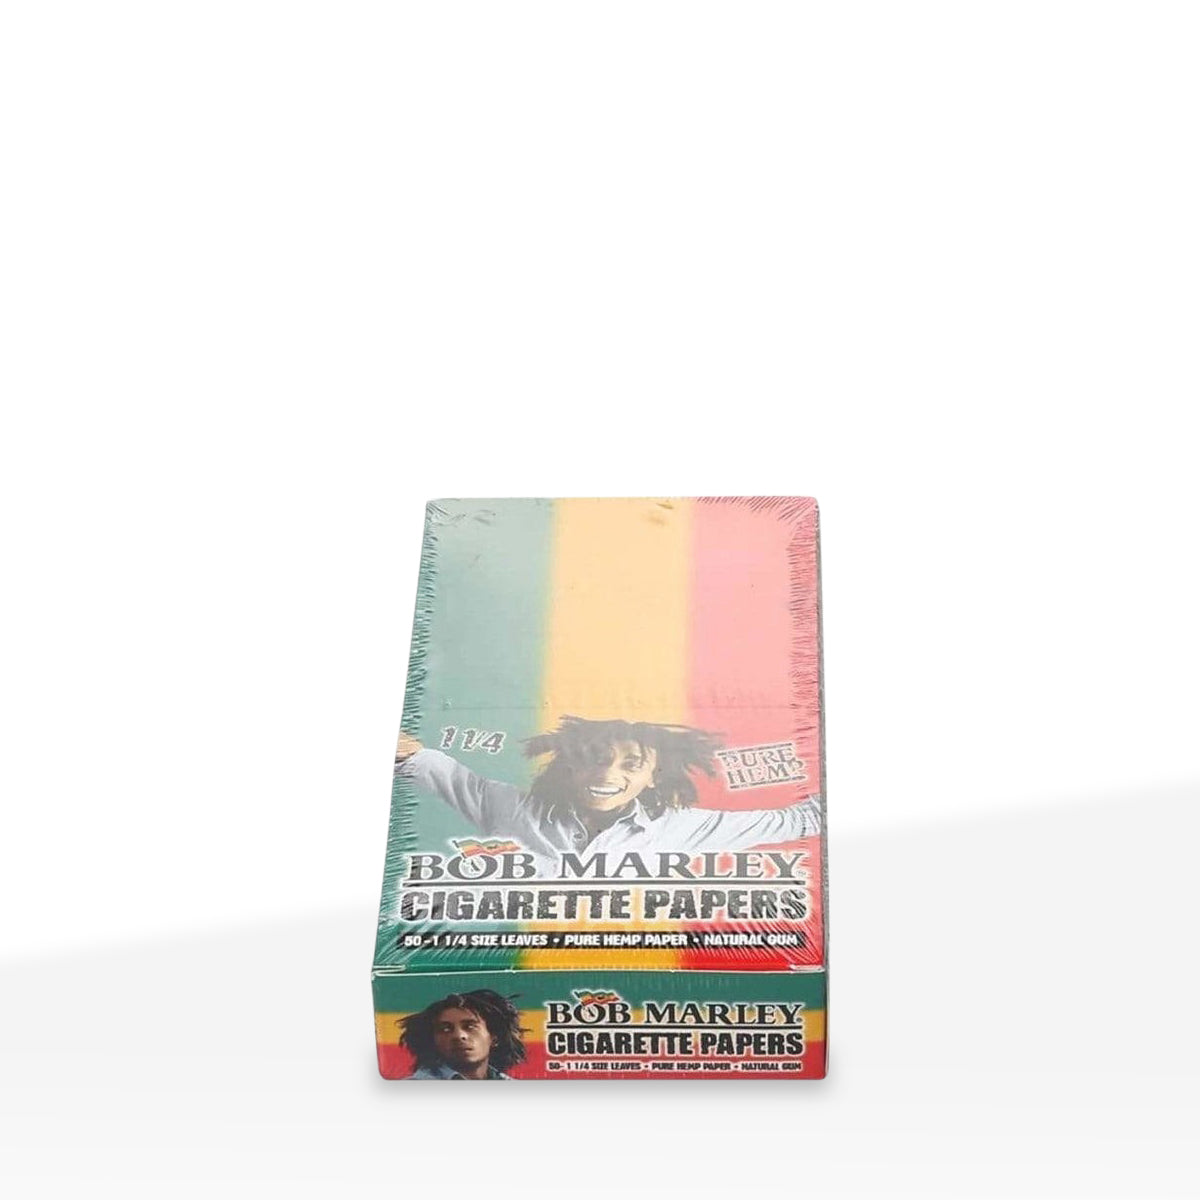 Bob Marley | Hemp Rolling Papers Classic 1¼ Size | 78mm - Classic White - 25 Count